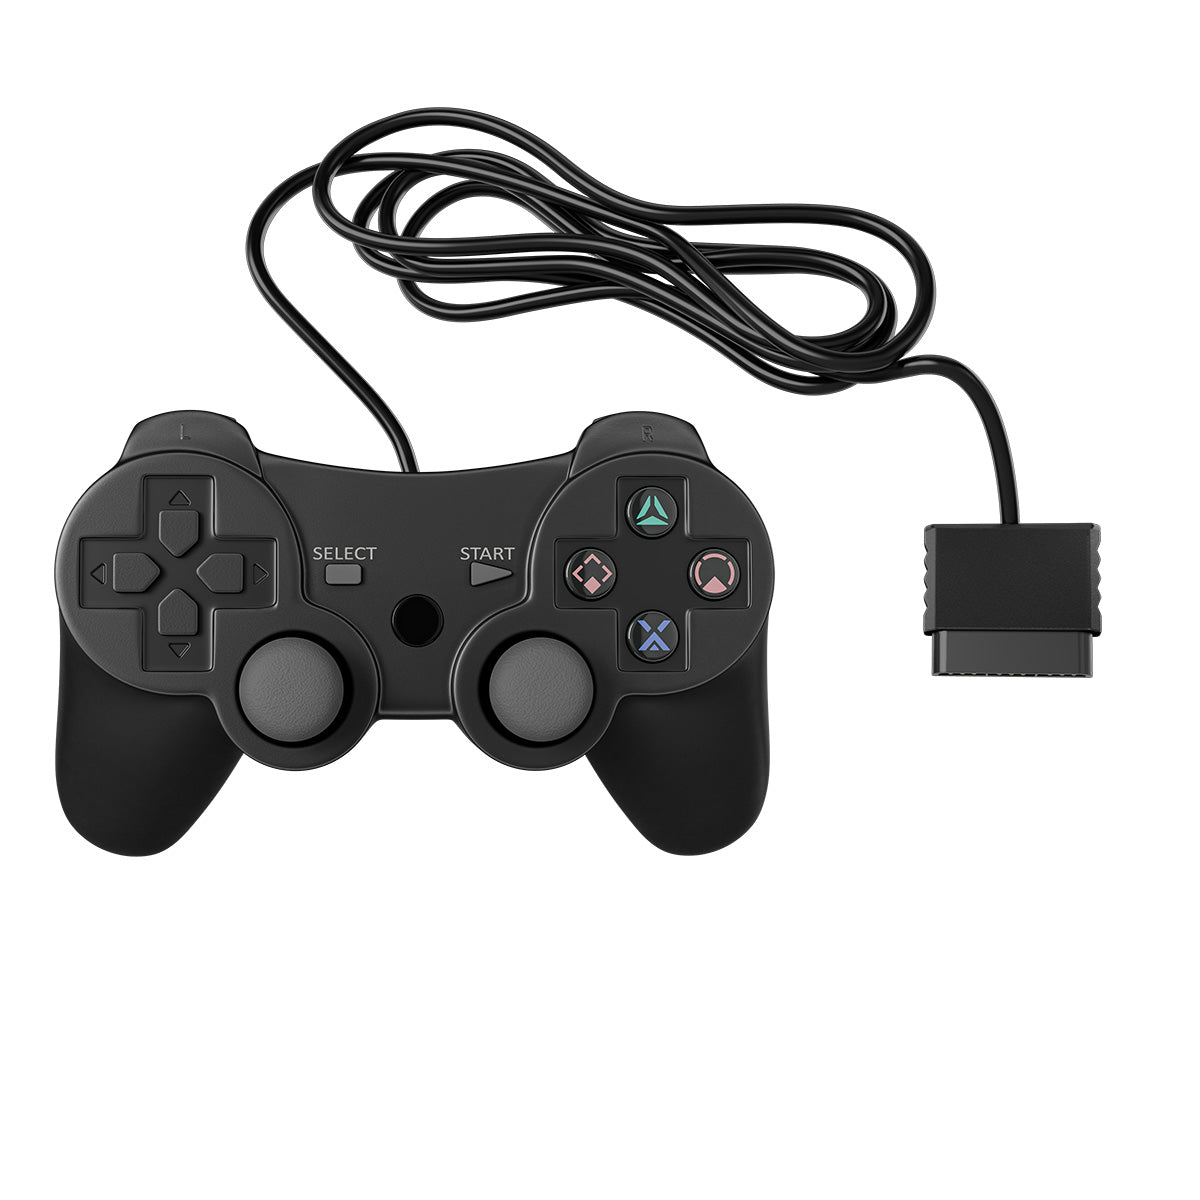 SENTINEL Wired Controller for Sony PS2® - XYAB